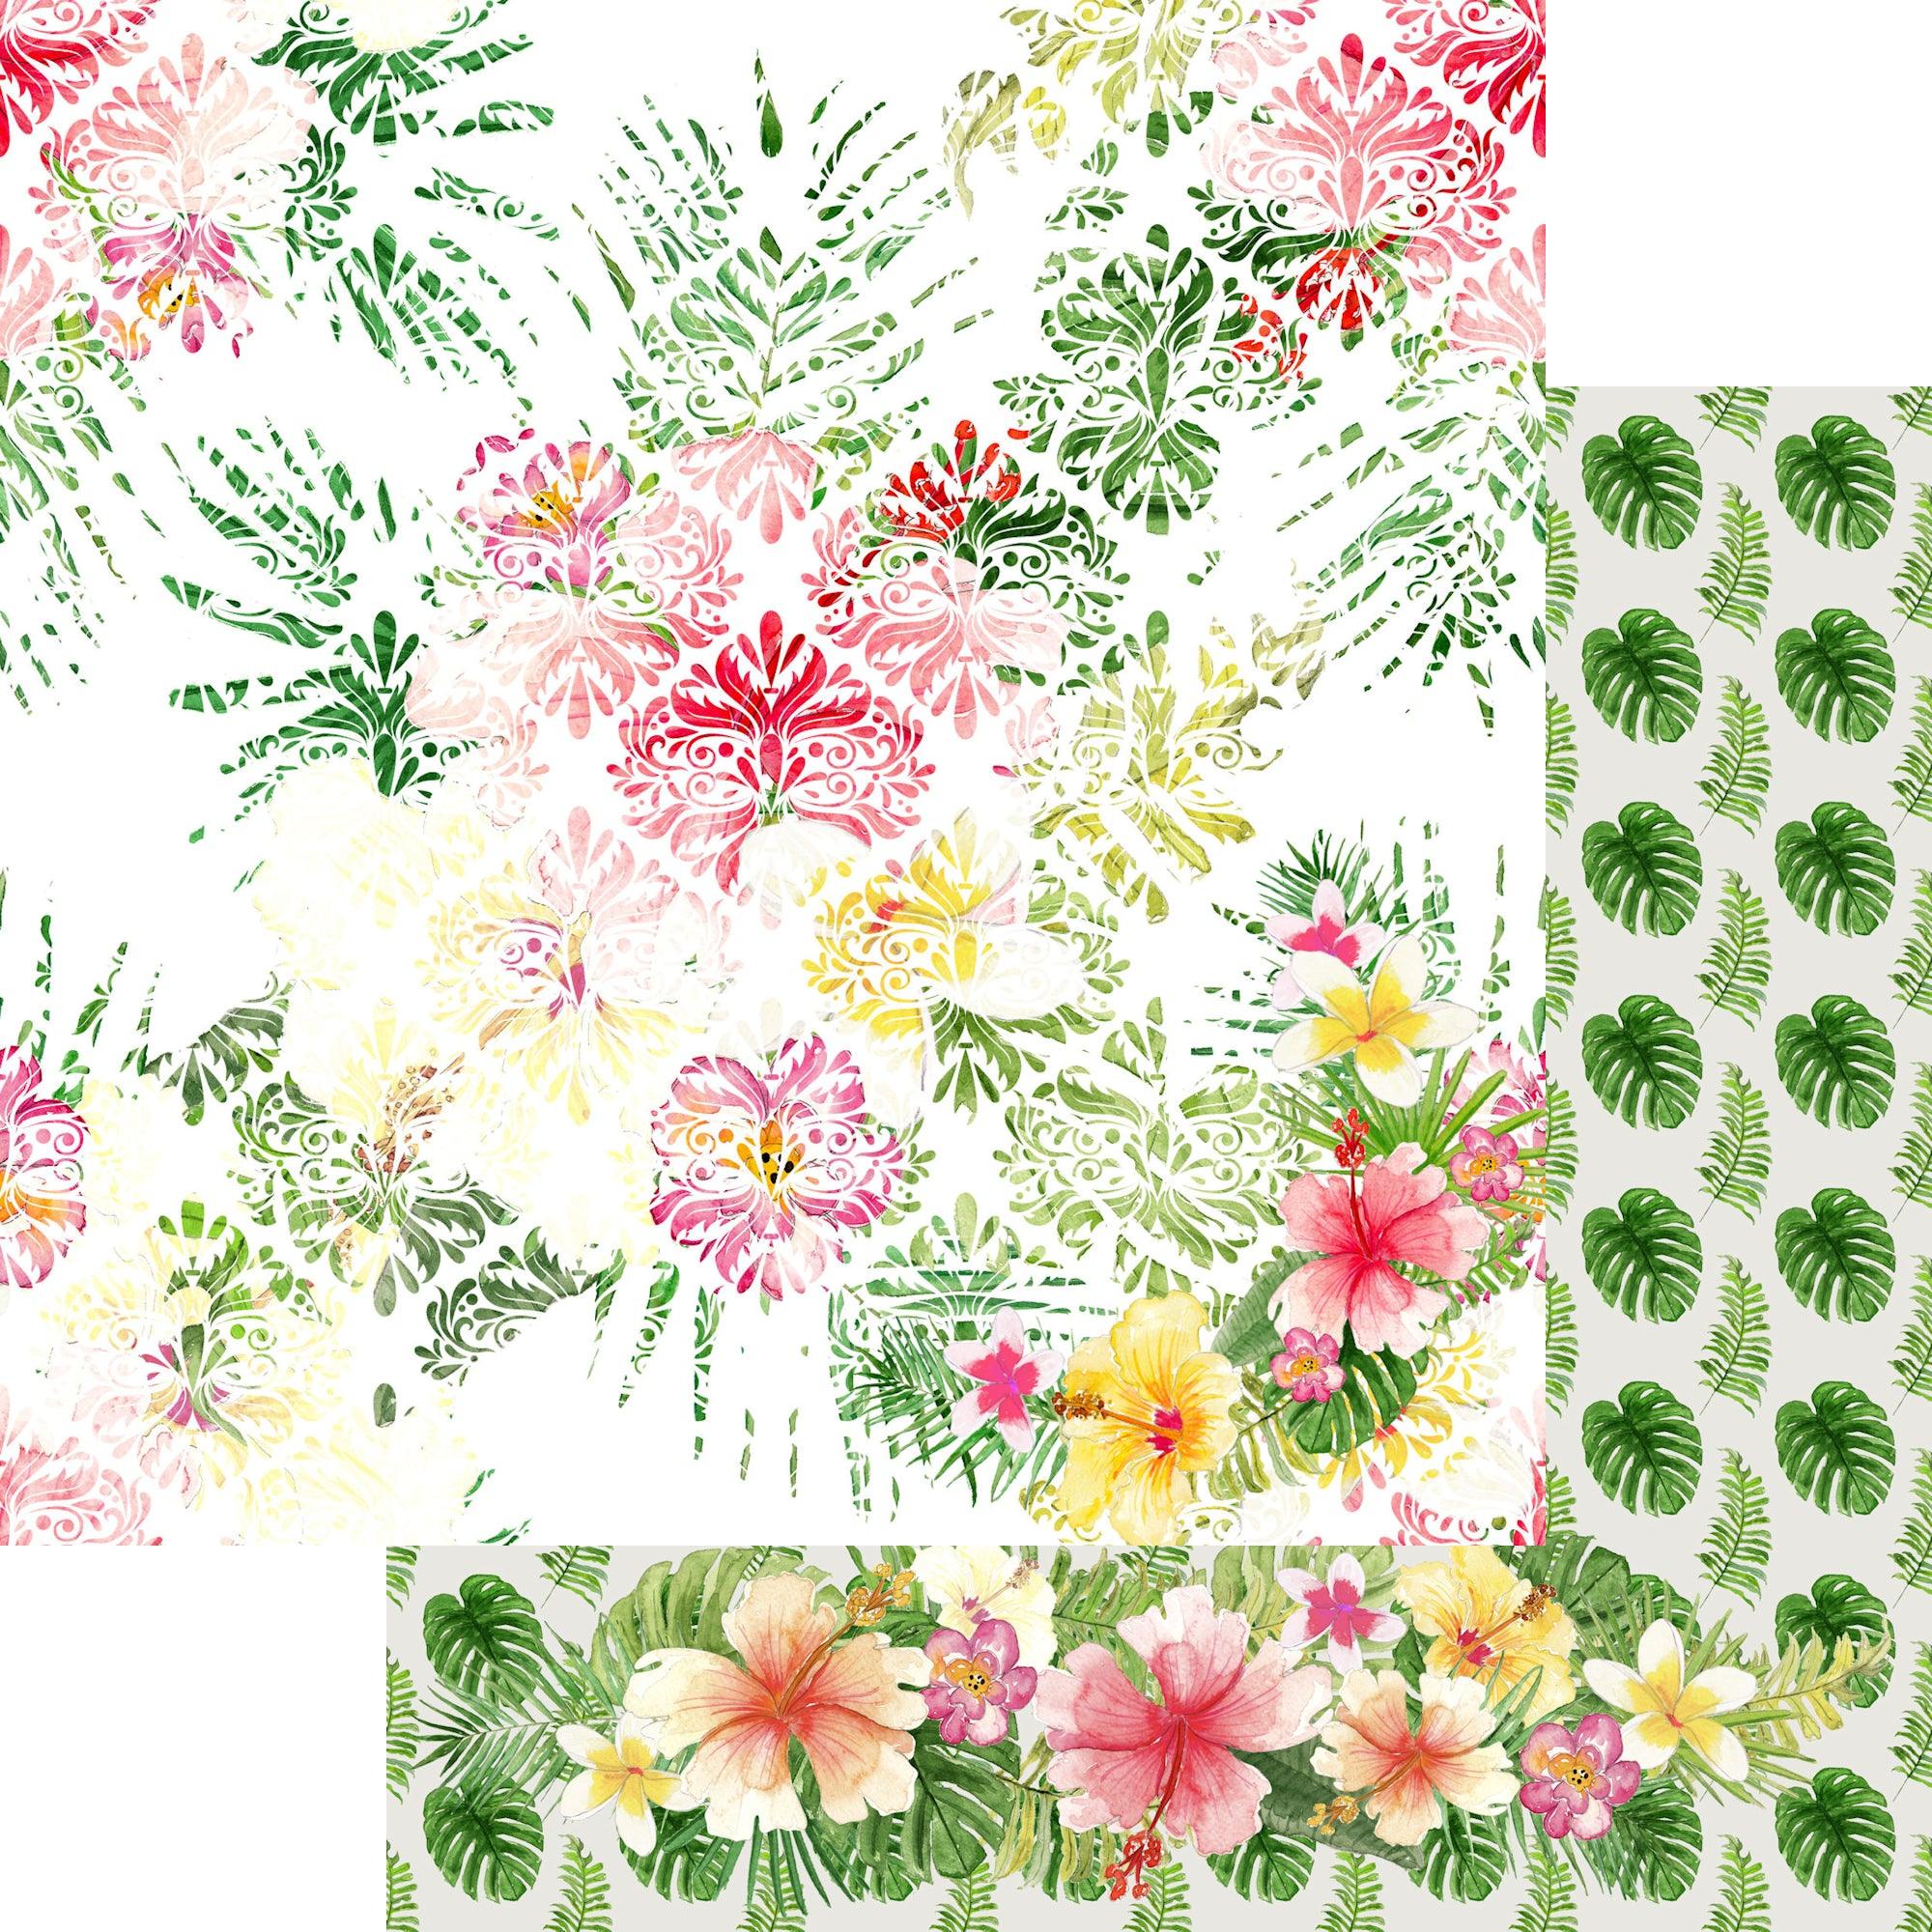 Aloha, Hawaii Collection Hawaiian Hibiscus 12 x 12 Double-Sided Scrapbook Paper by SSC Designs - Scrapbook Supply Companies